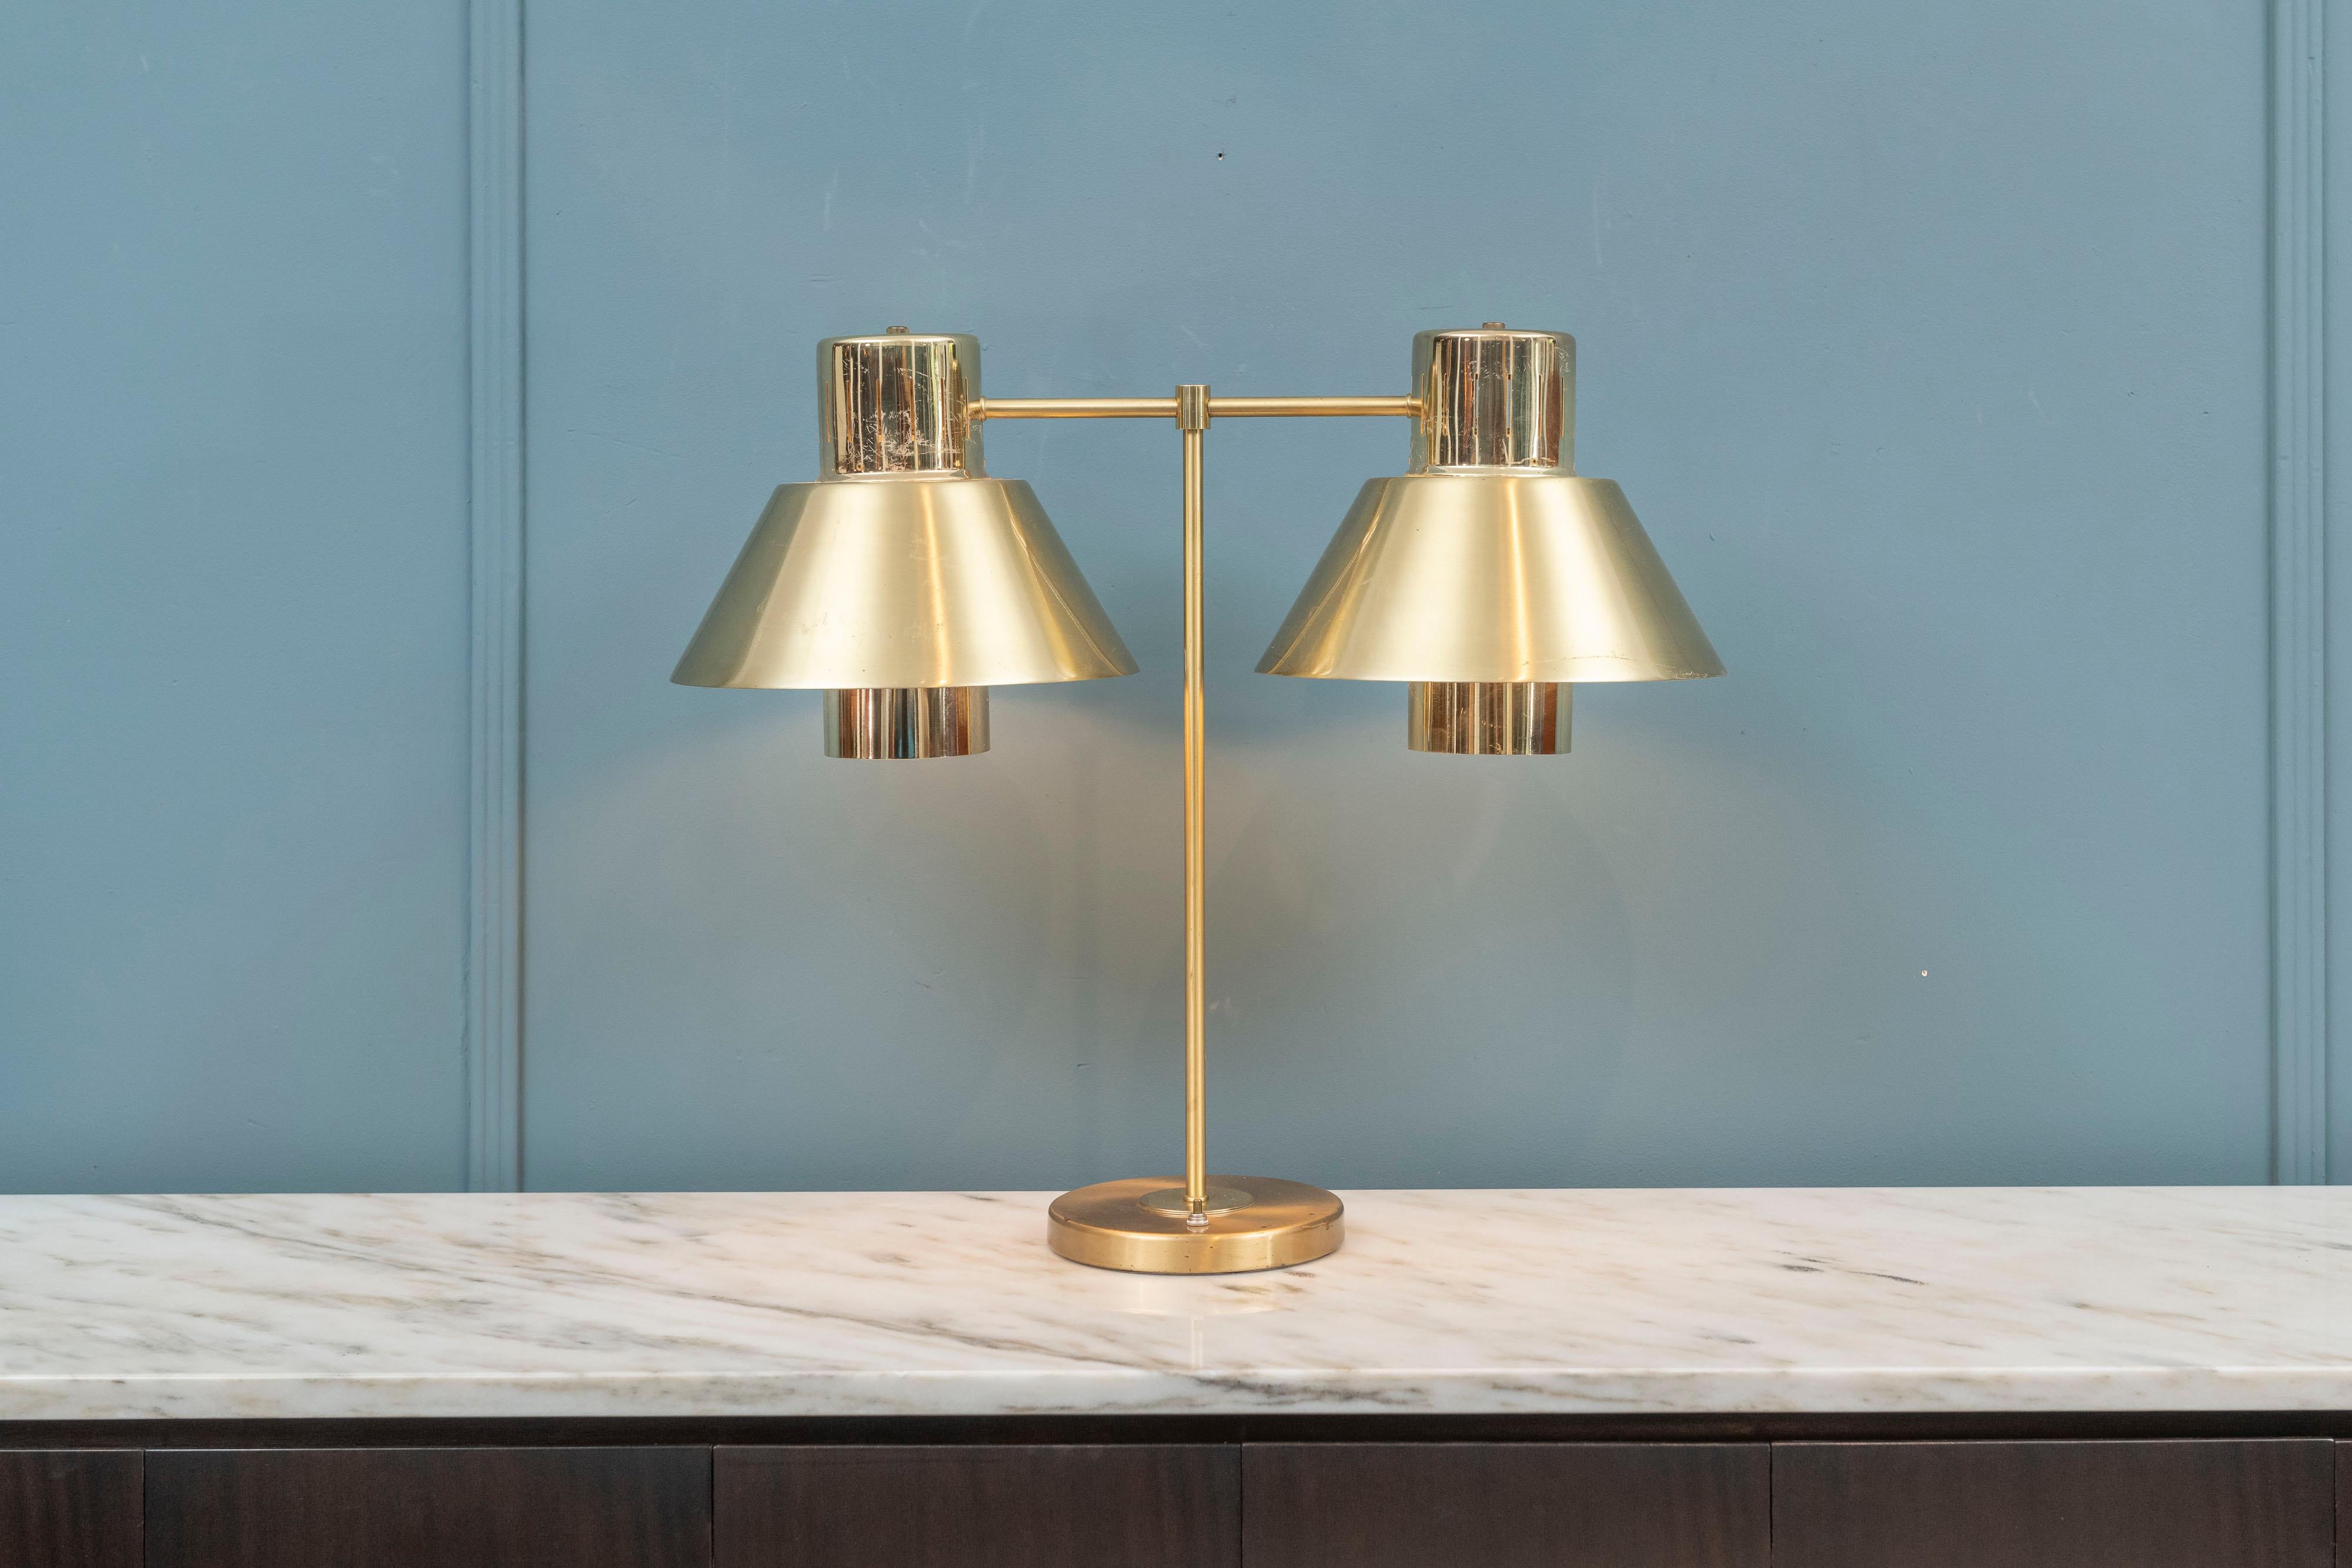 Gerald Thurston brass double shade table lamp for Lightolier, U.S.A. Reminiscent of a bankers counter or desk lamp impressive scale with double light sockets and signs of use and wear. Ready to install.